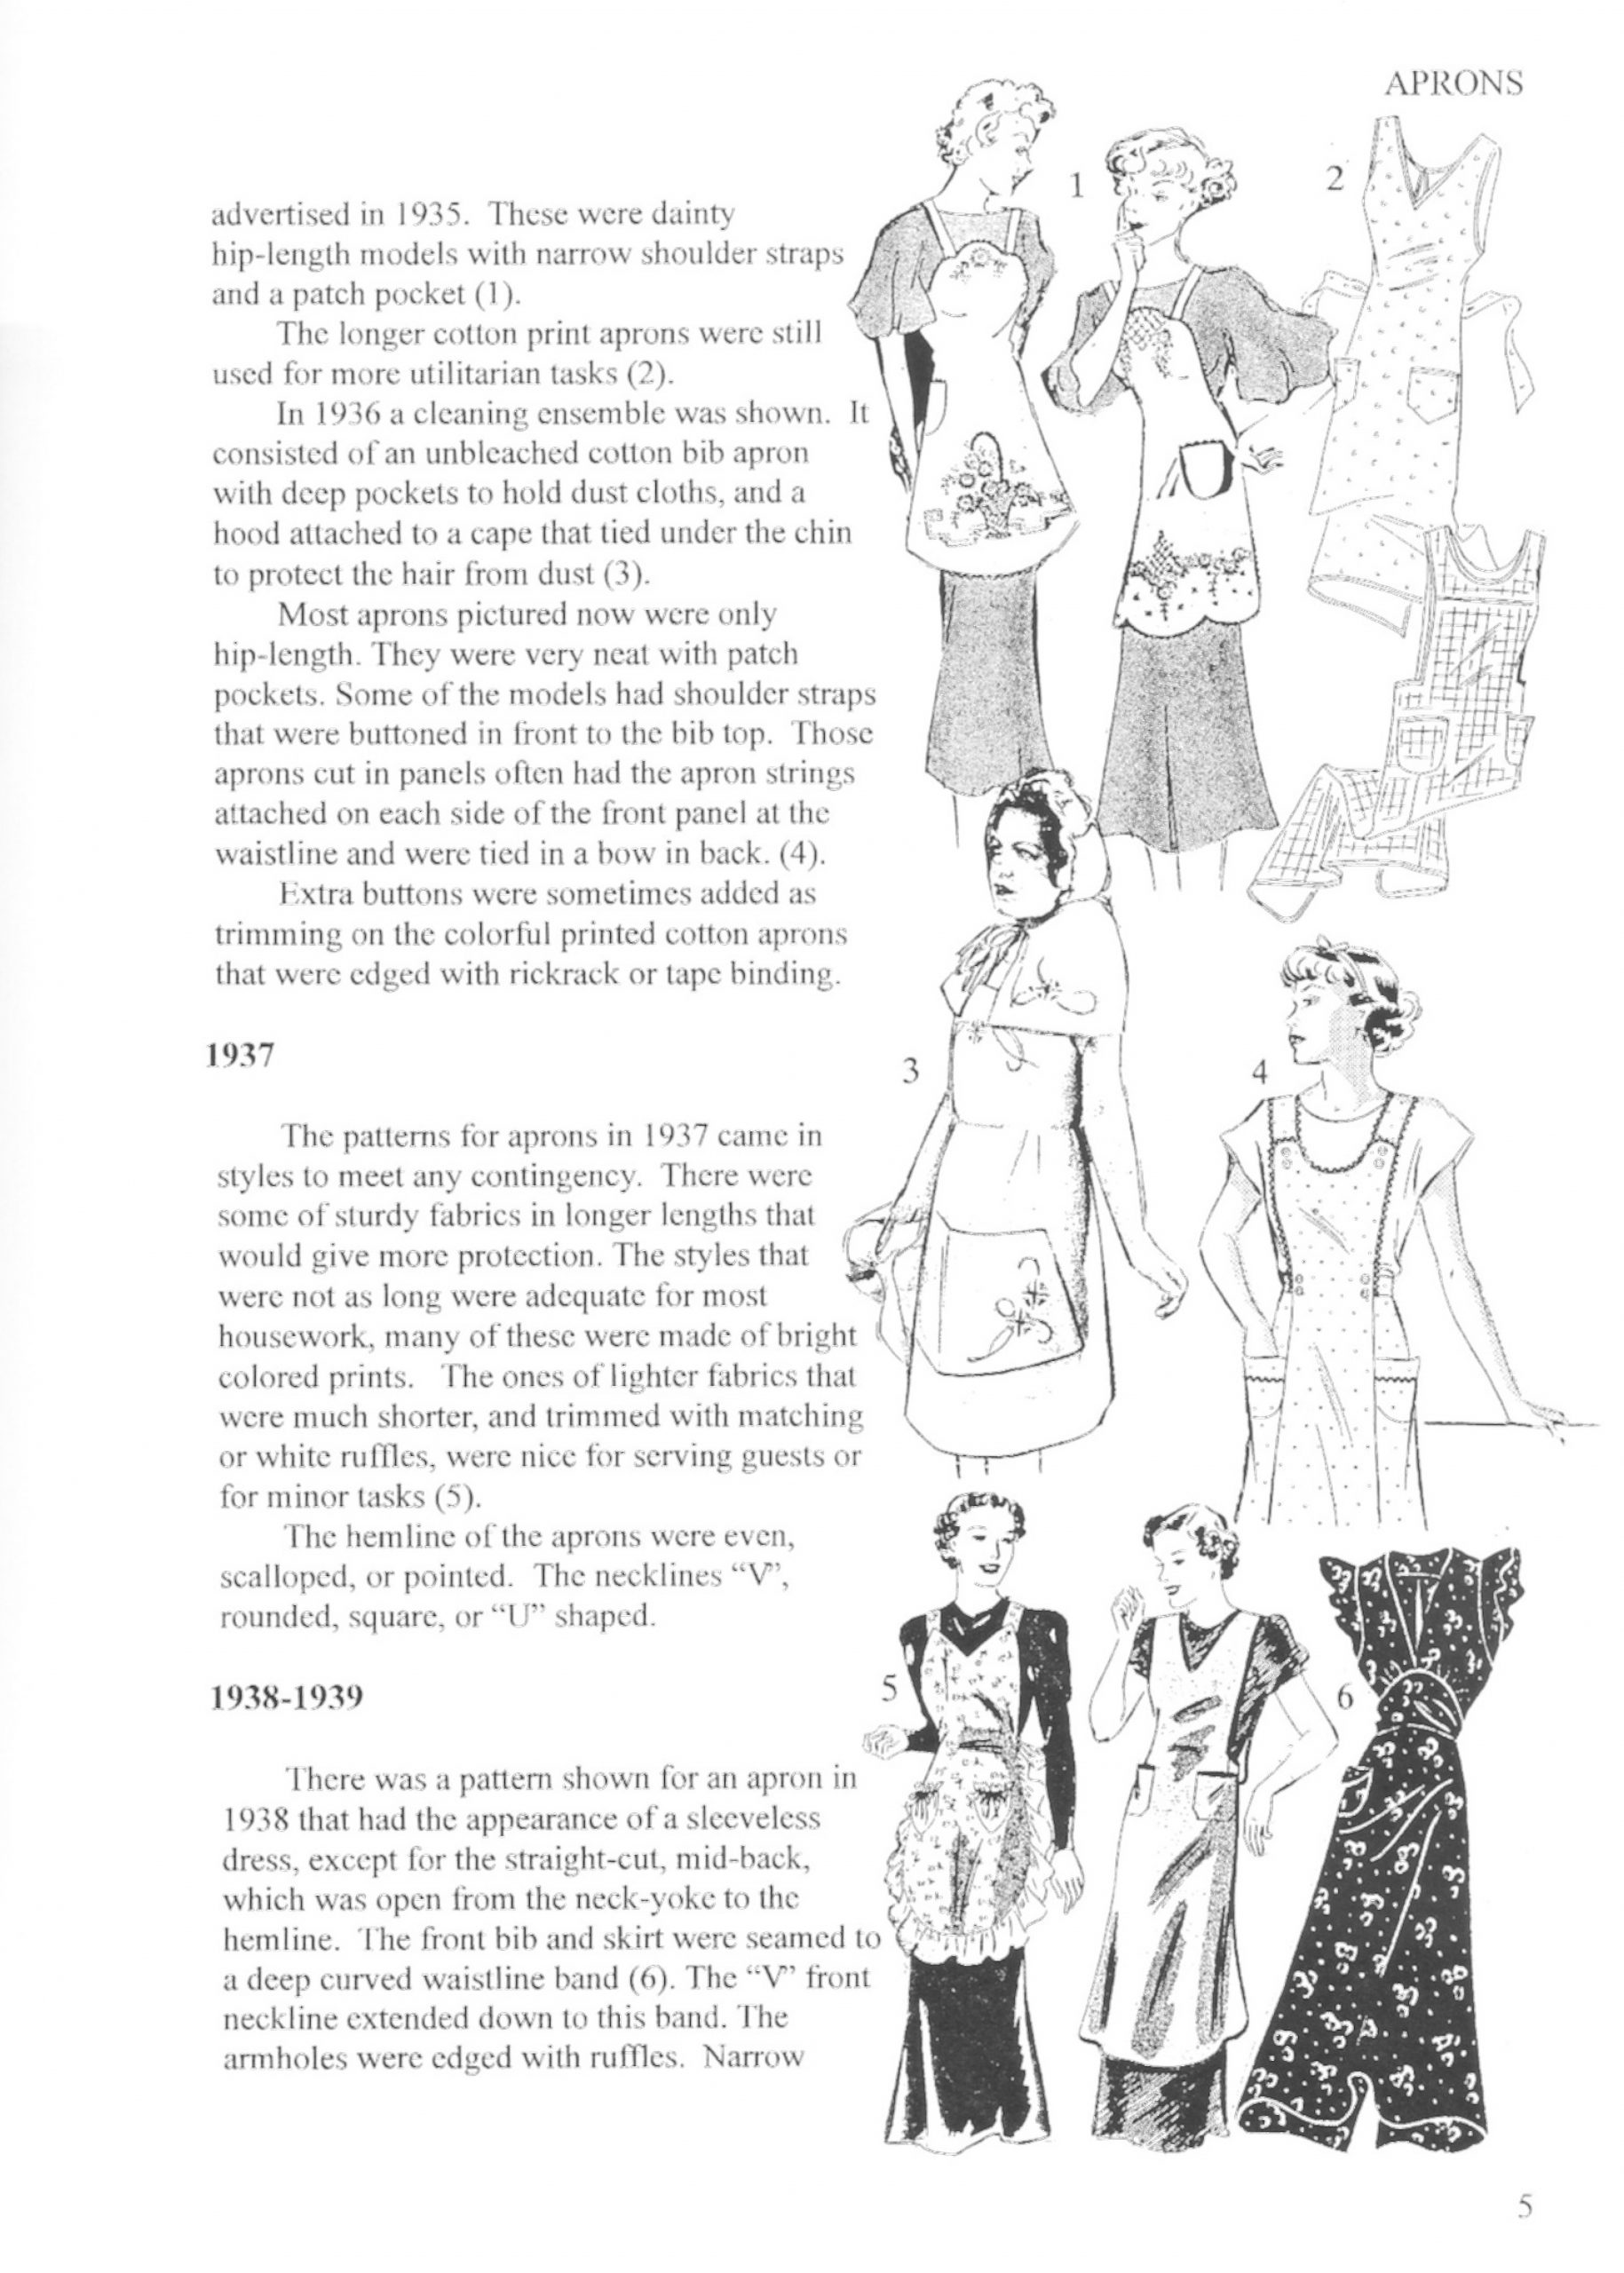 Reference Book of Women's Vintage Clothing 1930-1939 - La Barre Books